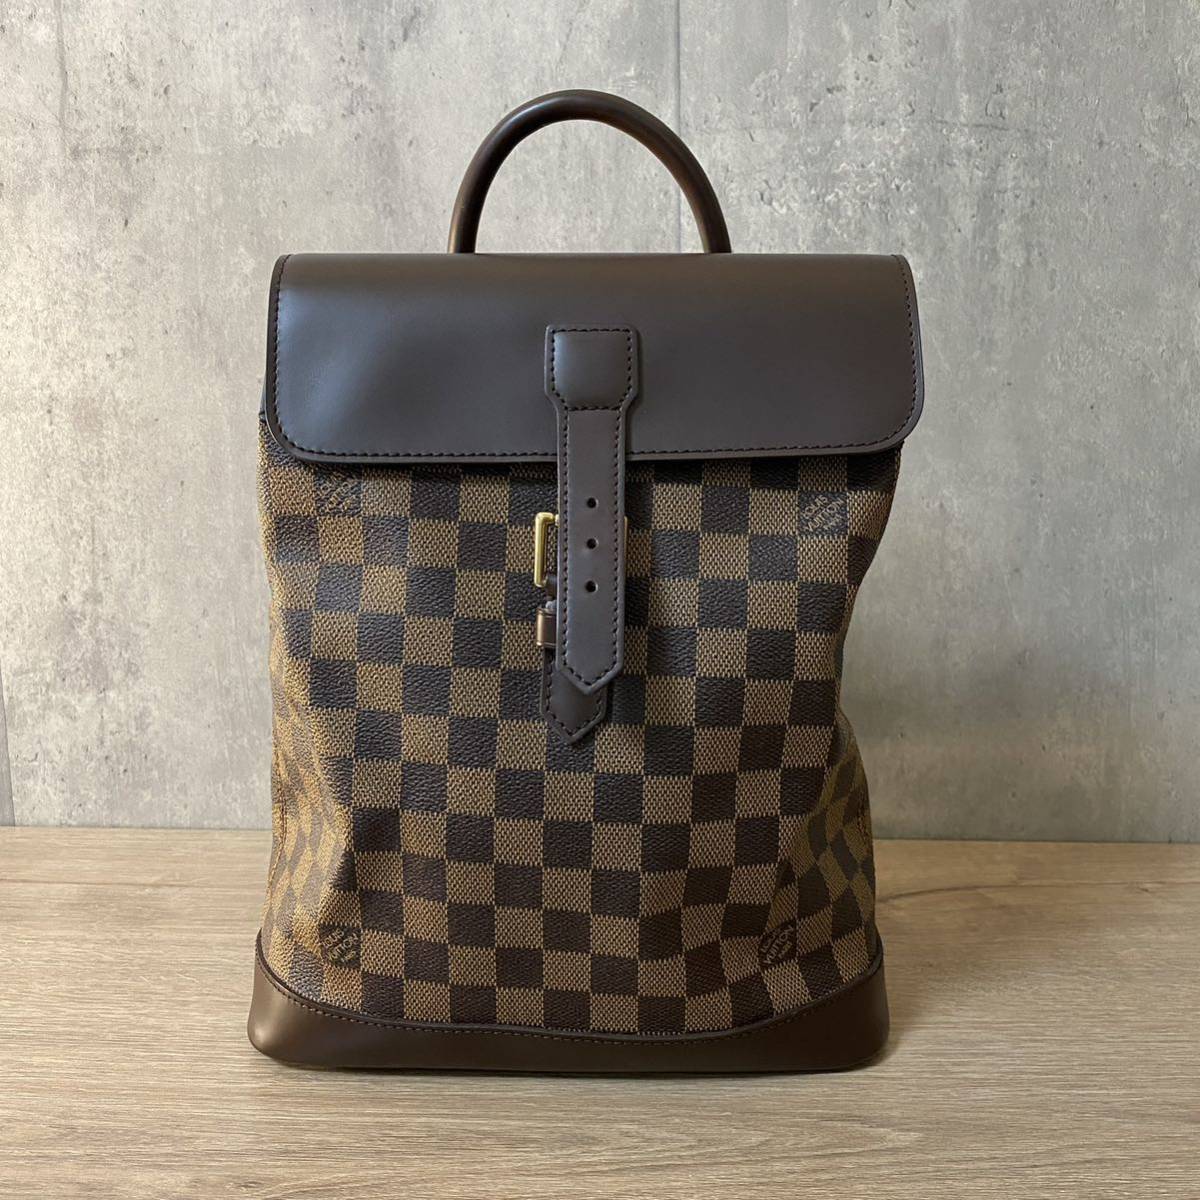 LOUISVUITTON ルイヴィトン ダミエ ソーホー リュックサック 美品